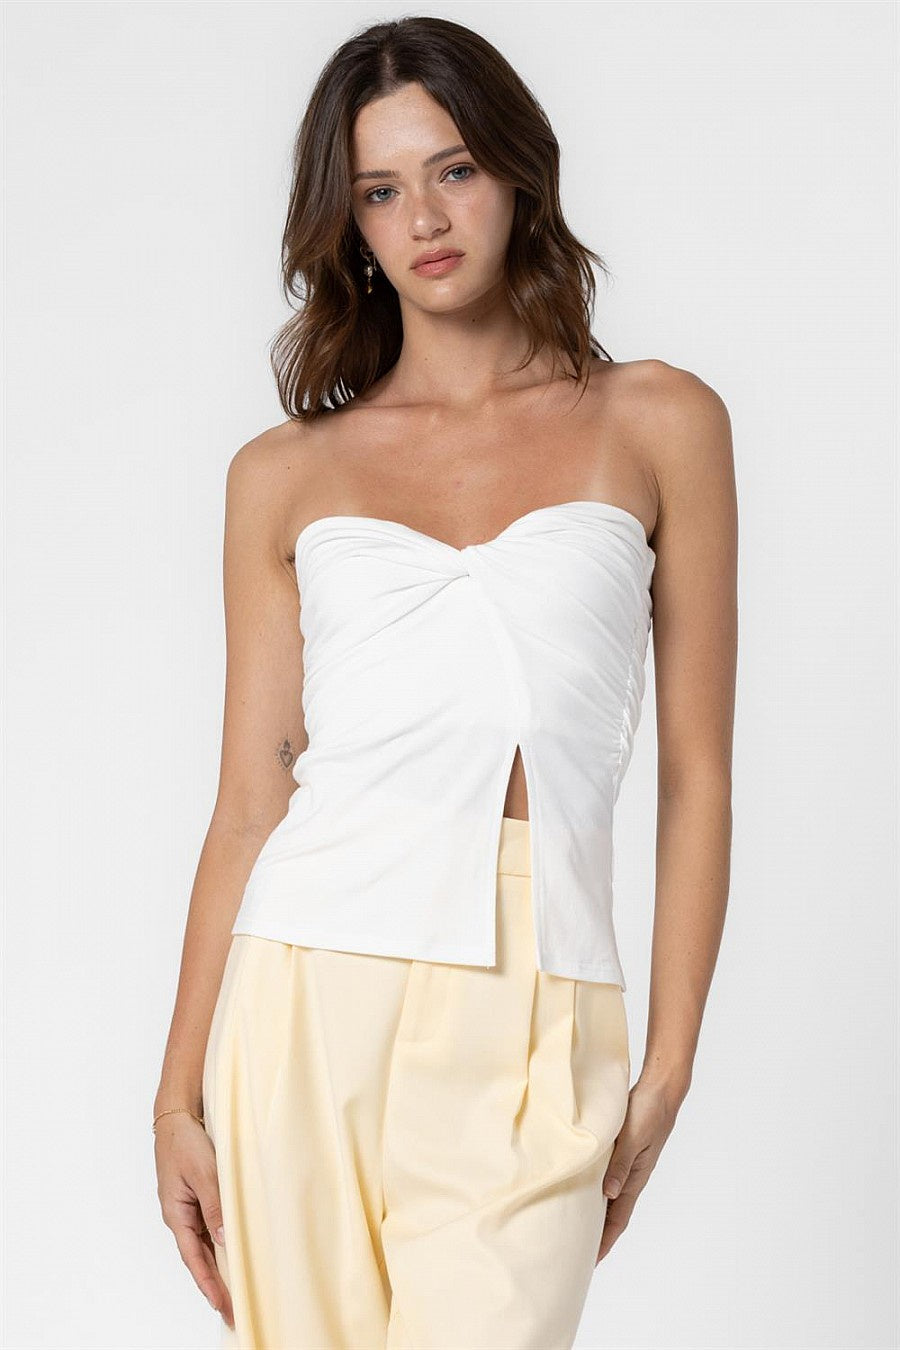 Featuring a twist front tube top with a side slit detail in the color off white 